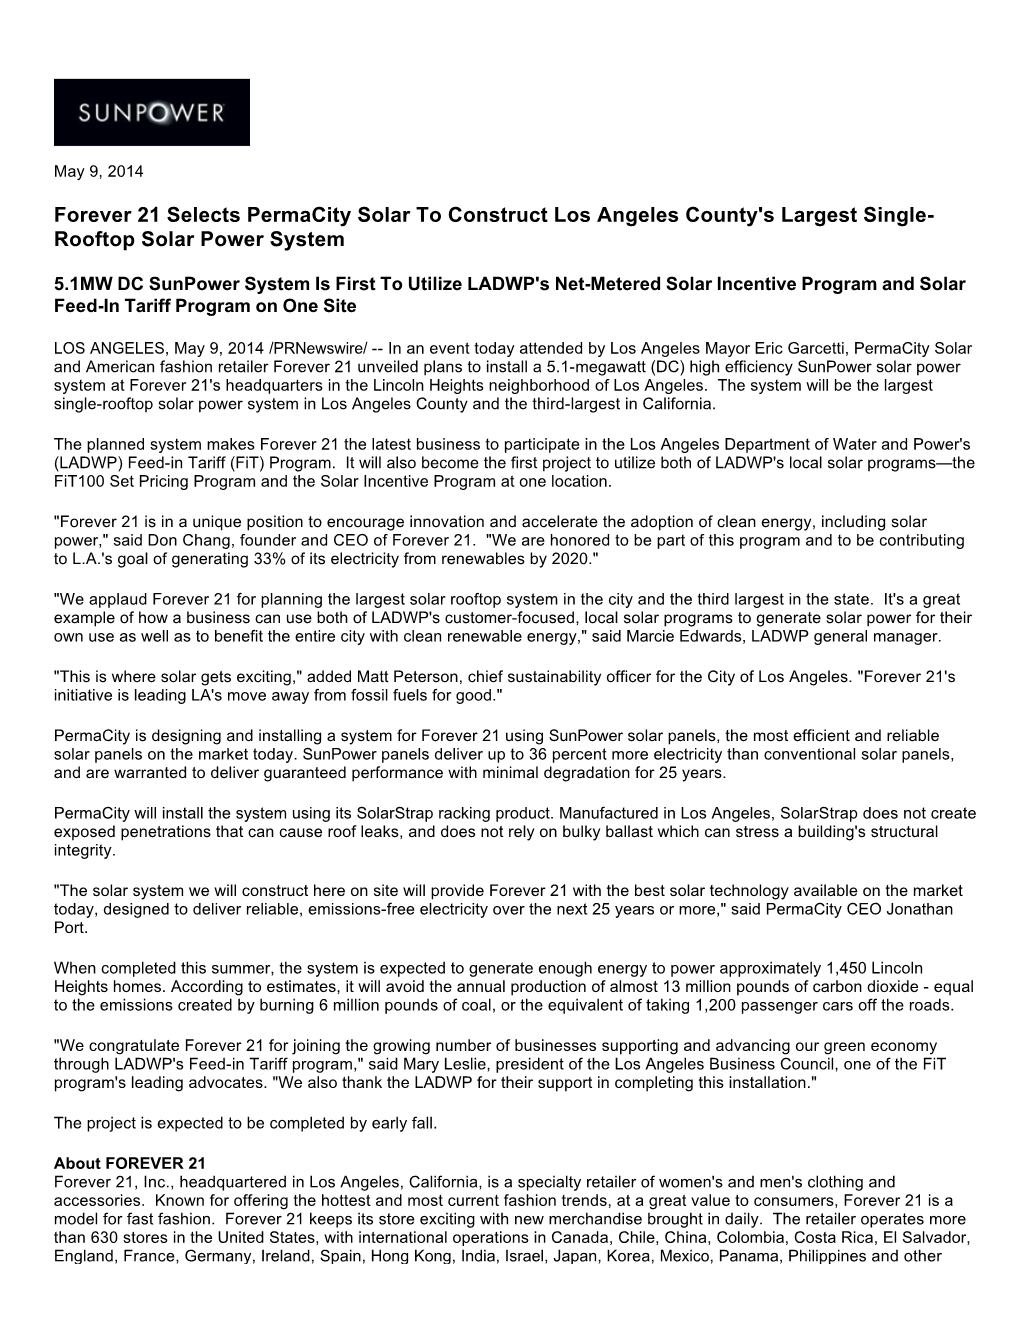 Forever 21 Selects Permacity Solar to Construct Los Angeles County's Largest Single- Rooftop Solar Power System